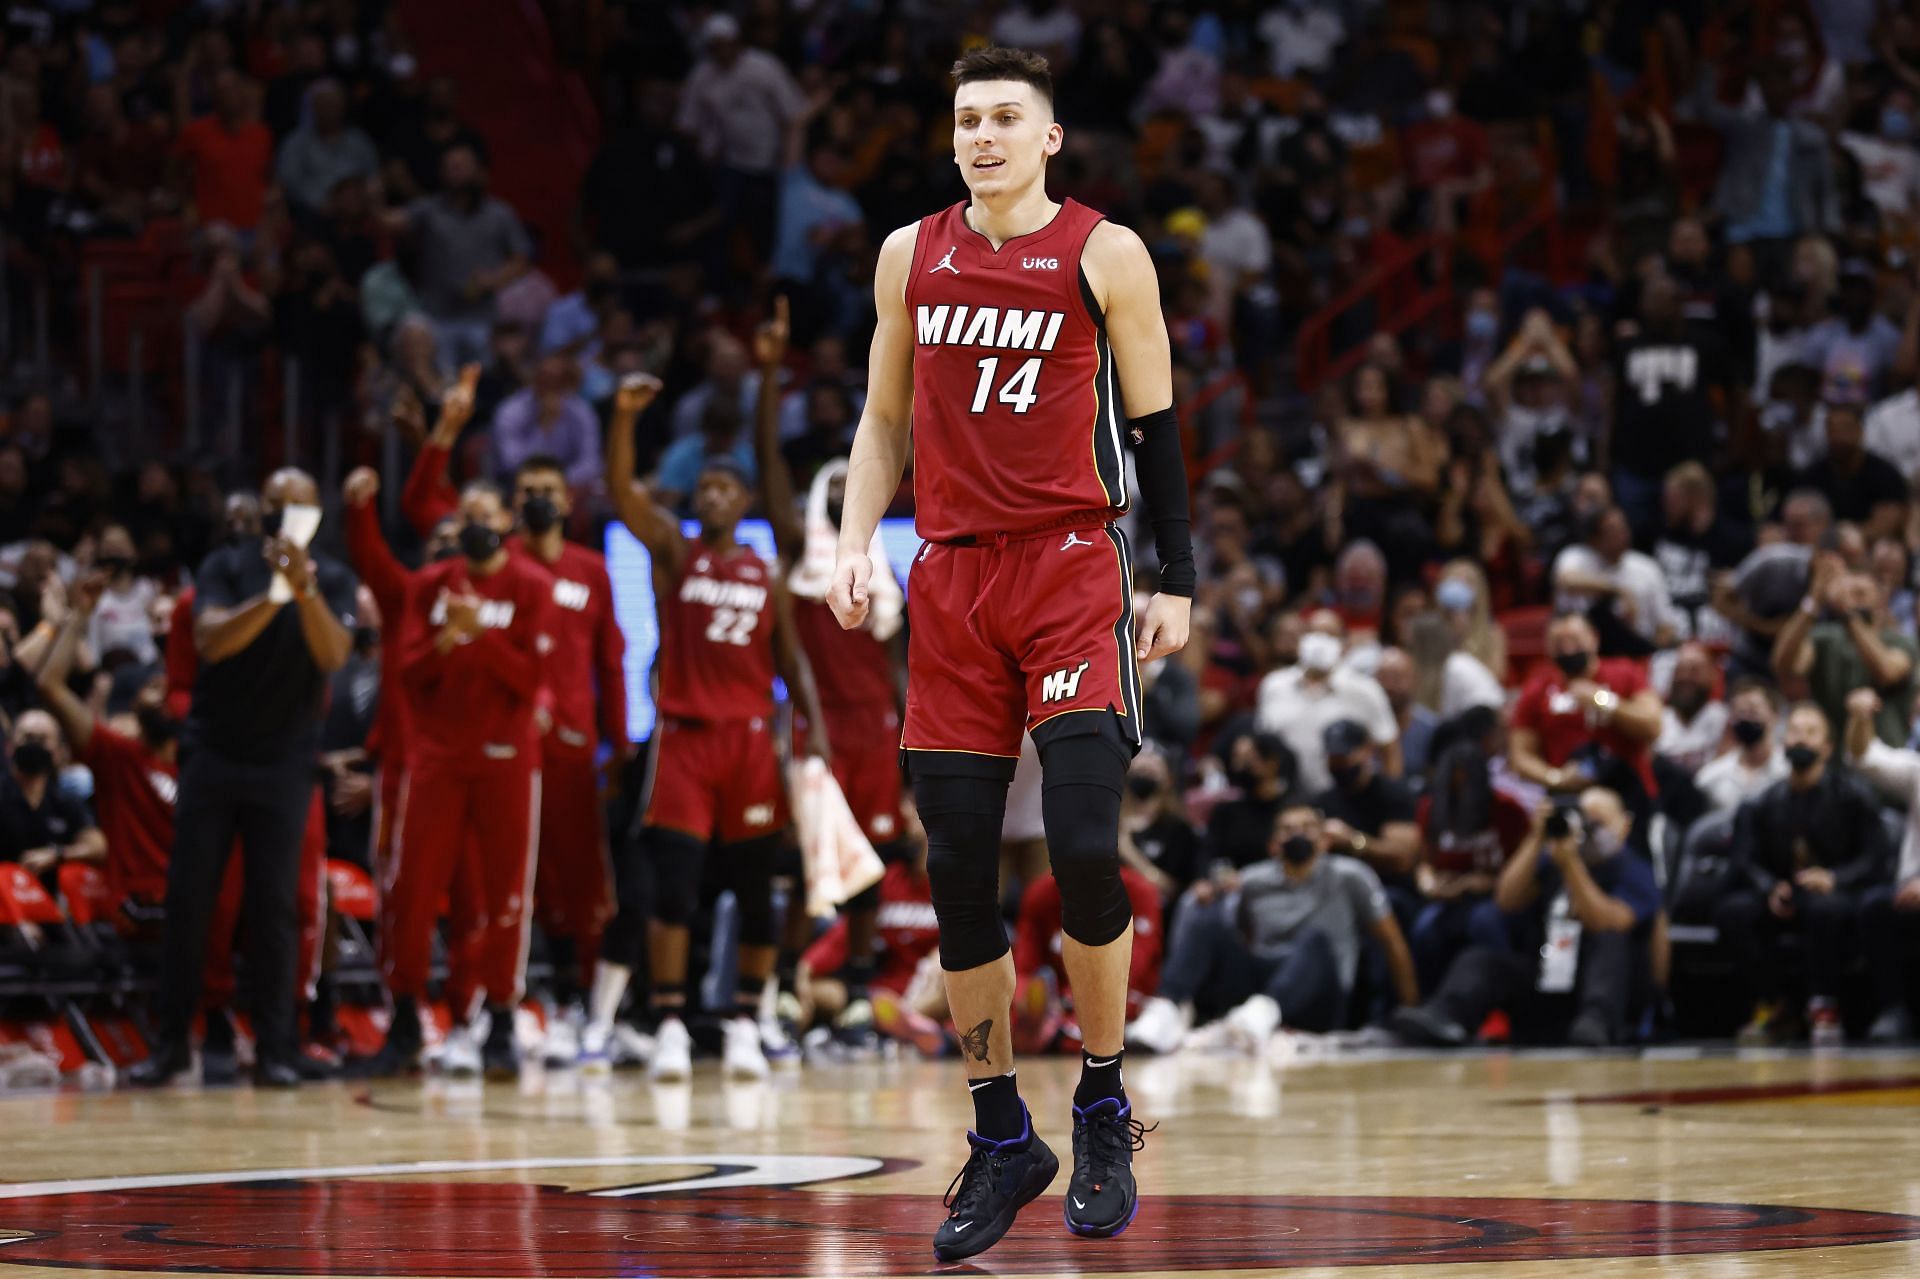 Tyler Herro of the Miami Heat was the No. 13 pick in the 2019 draft.